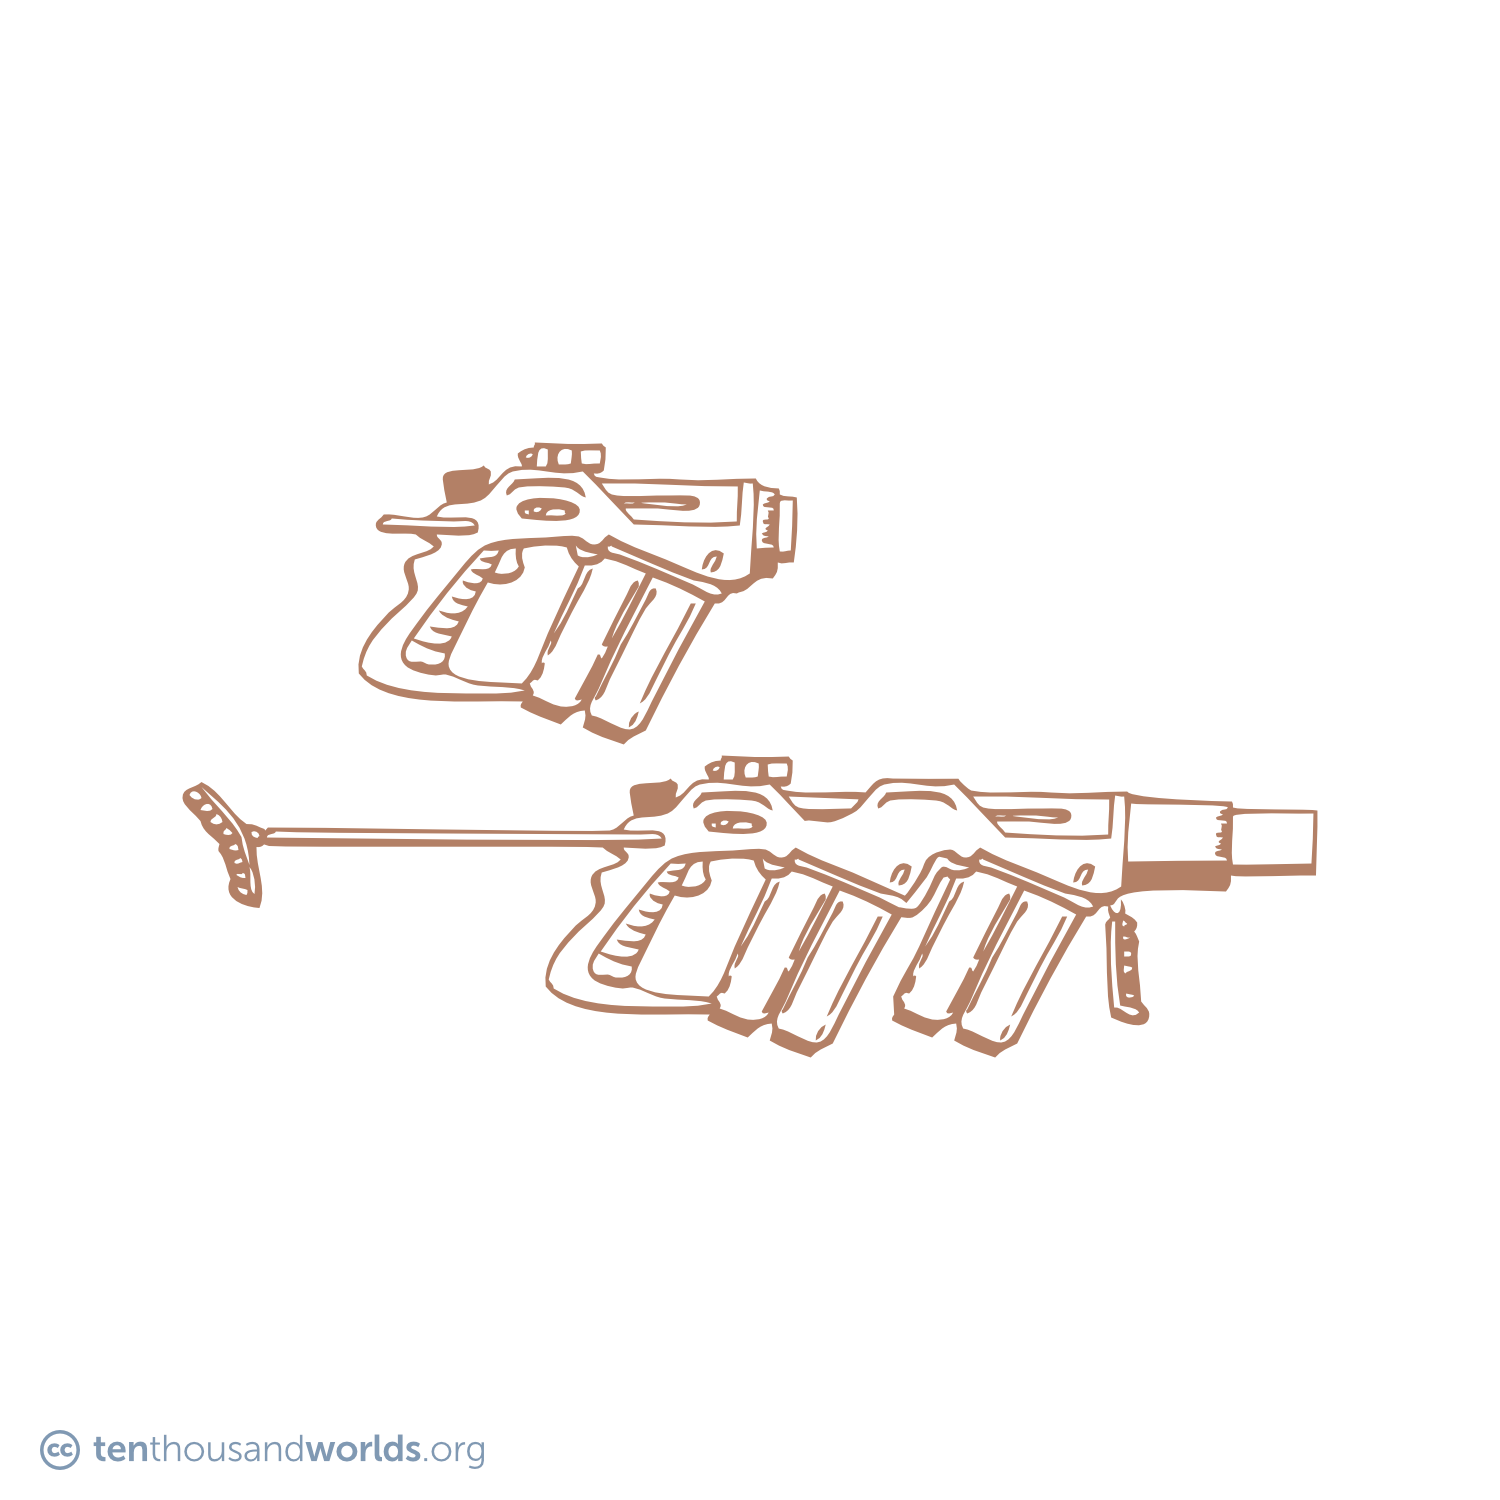 A pencil sketch of a futuristic stubby pistol and a longer rifle of a similar design, both of which use vials of gel and liquid as their ammunition and its payload.